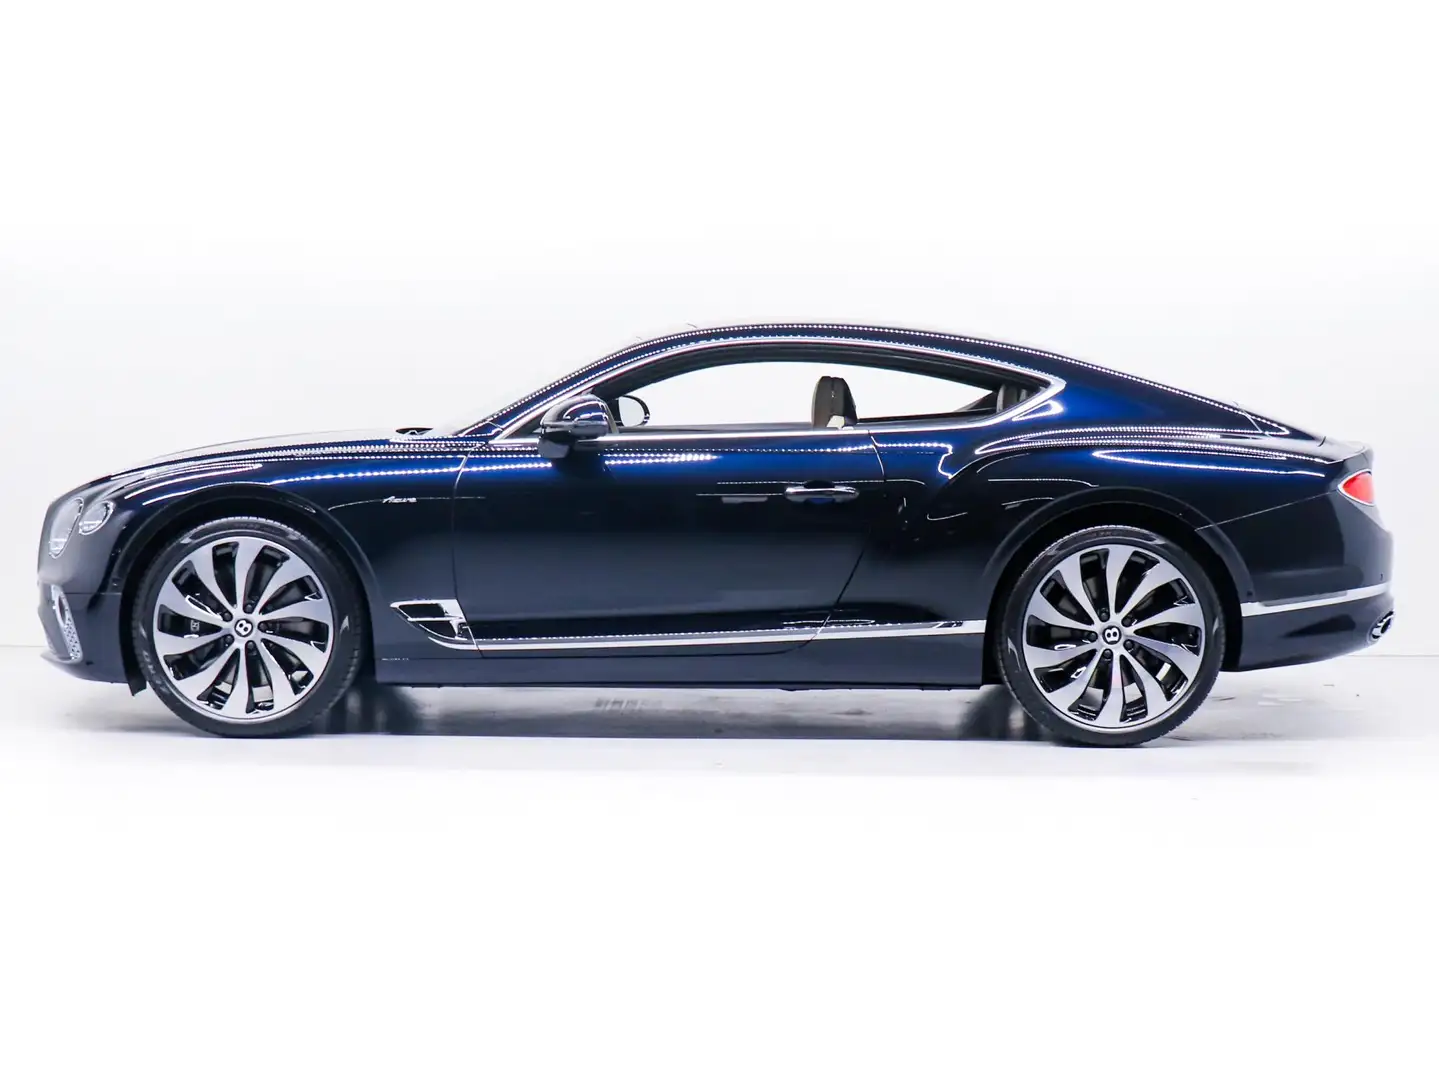 Bentley Continental GT 4.0 V8 Azure | Bang and Olufsen for Bentley | Tour - 2